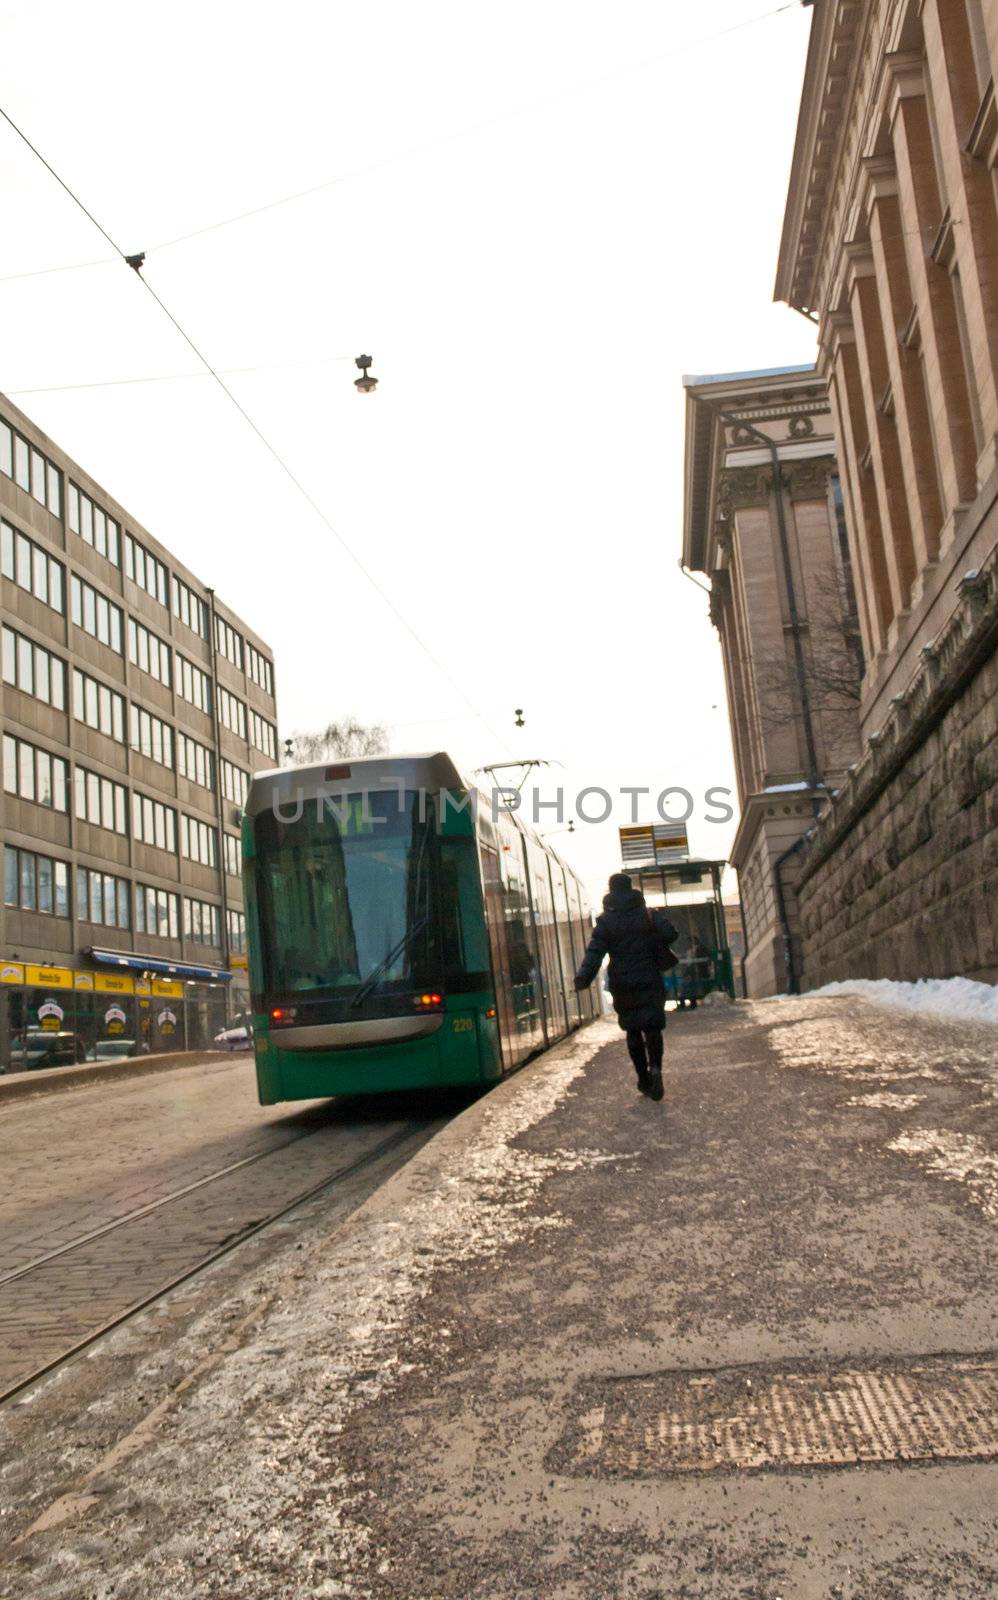 Stopping tram and a passenger in a hurry